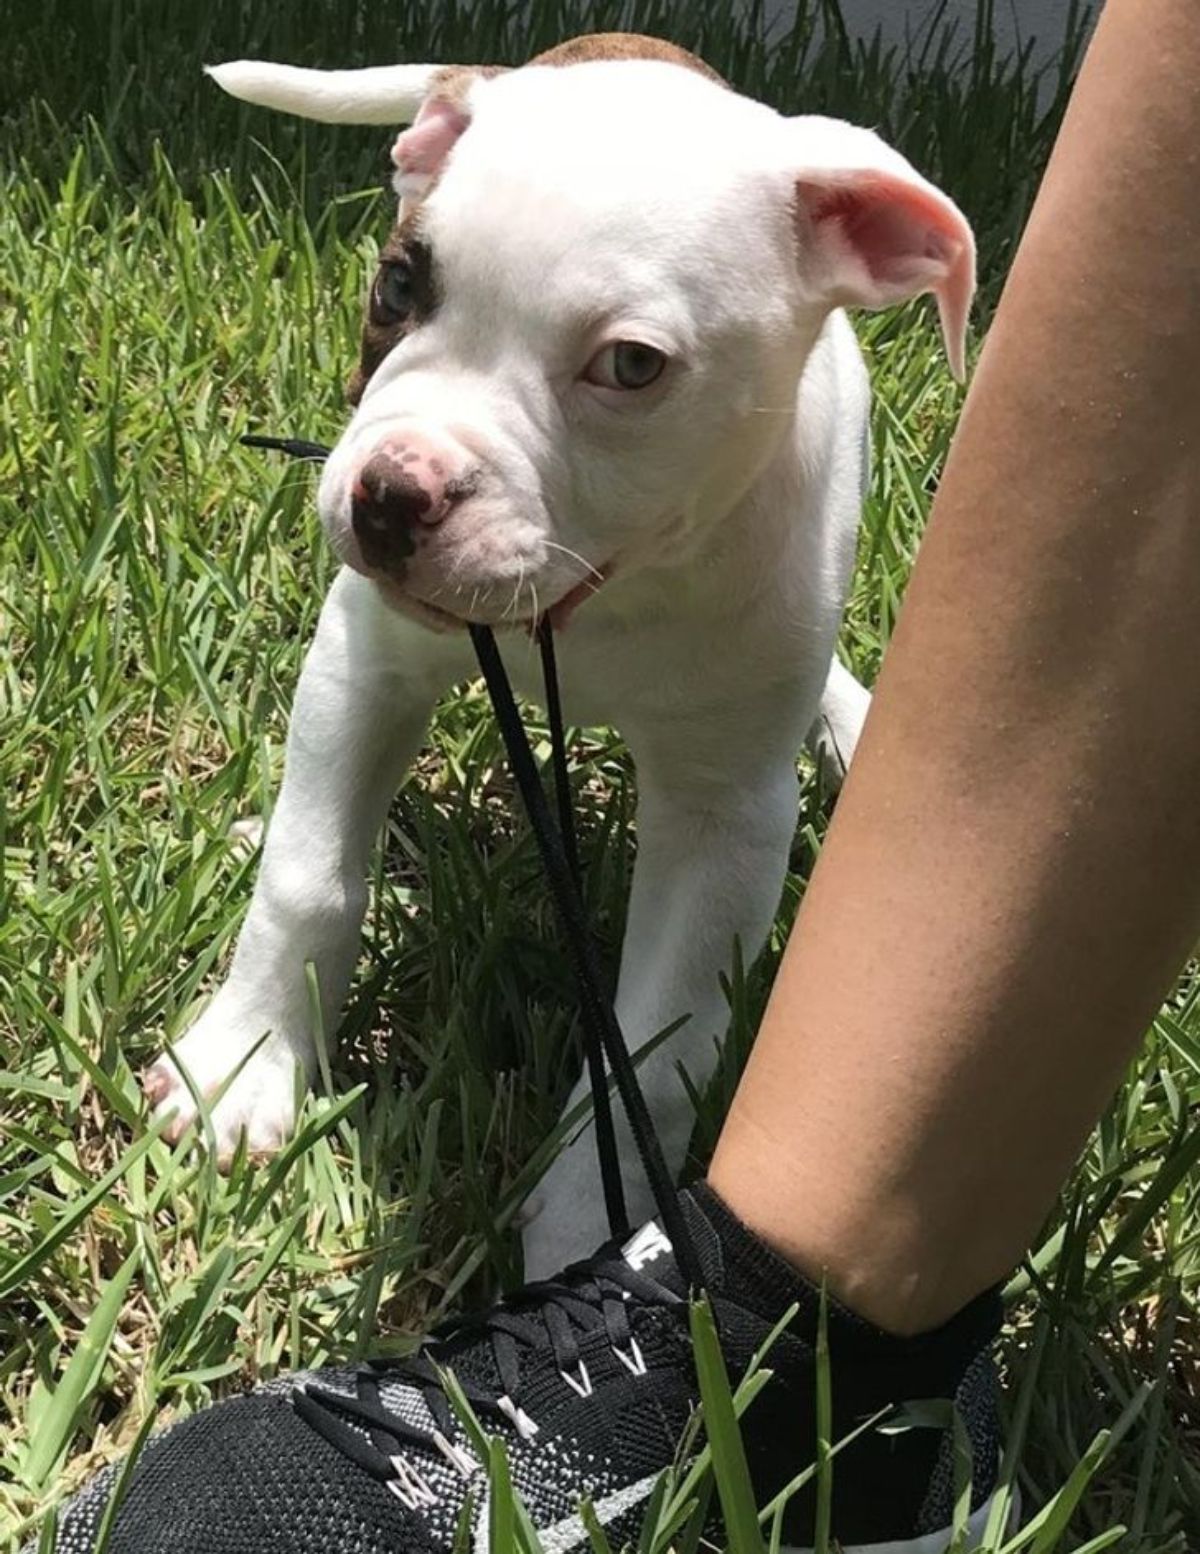 white and black puppy on grass biting someone black shoelaces